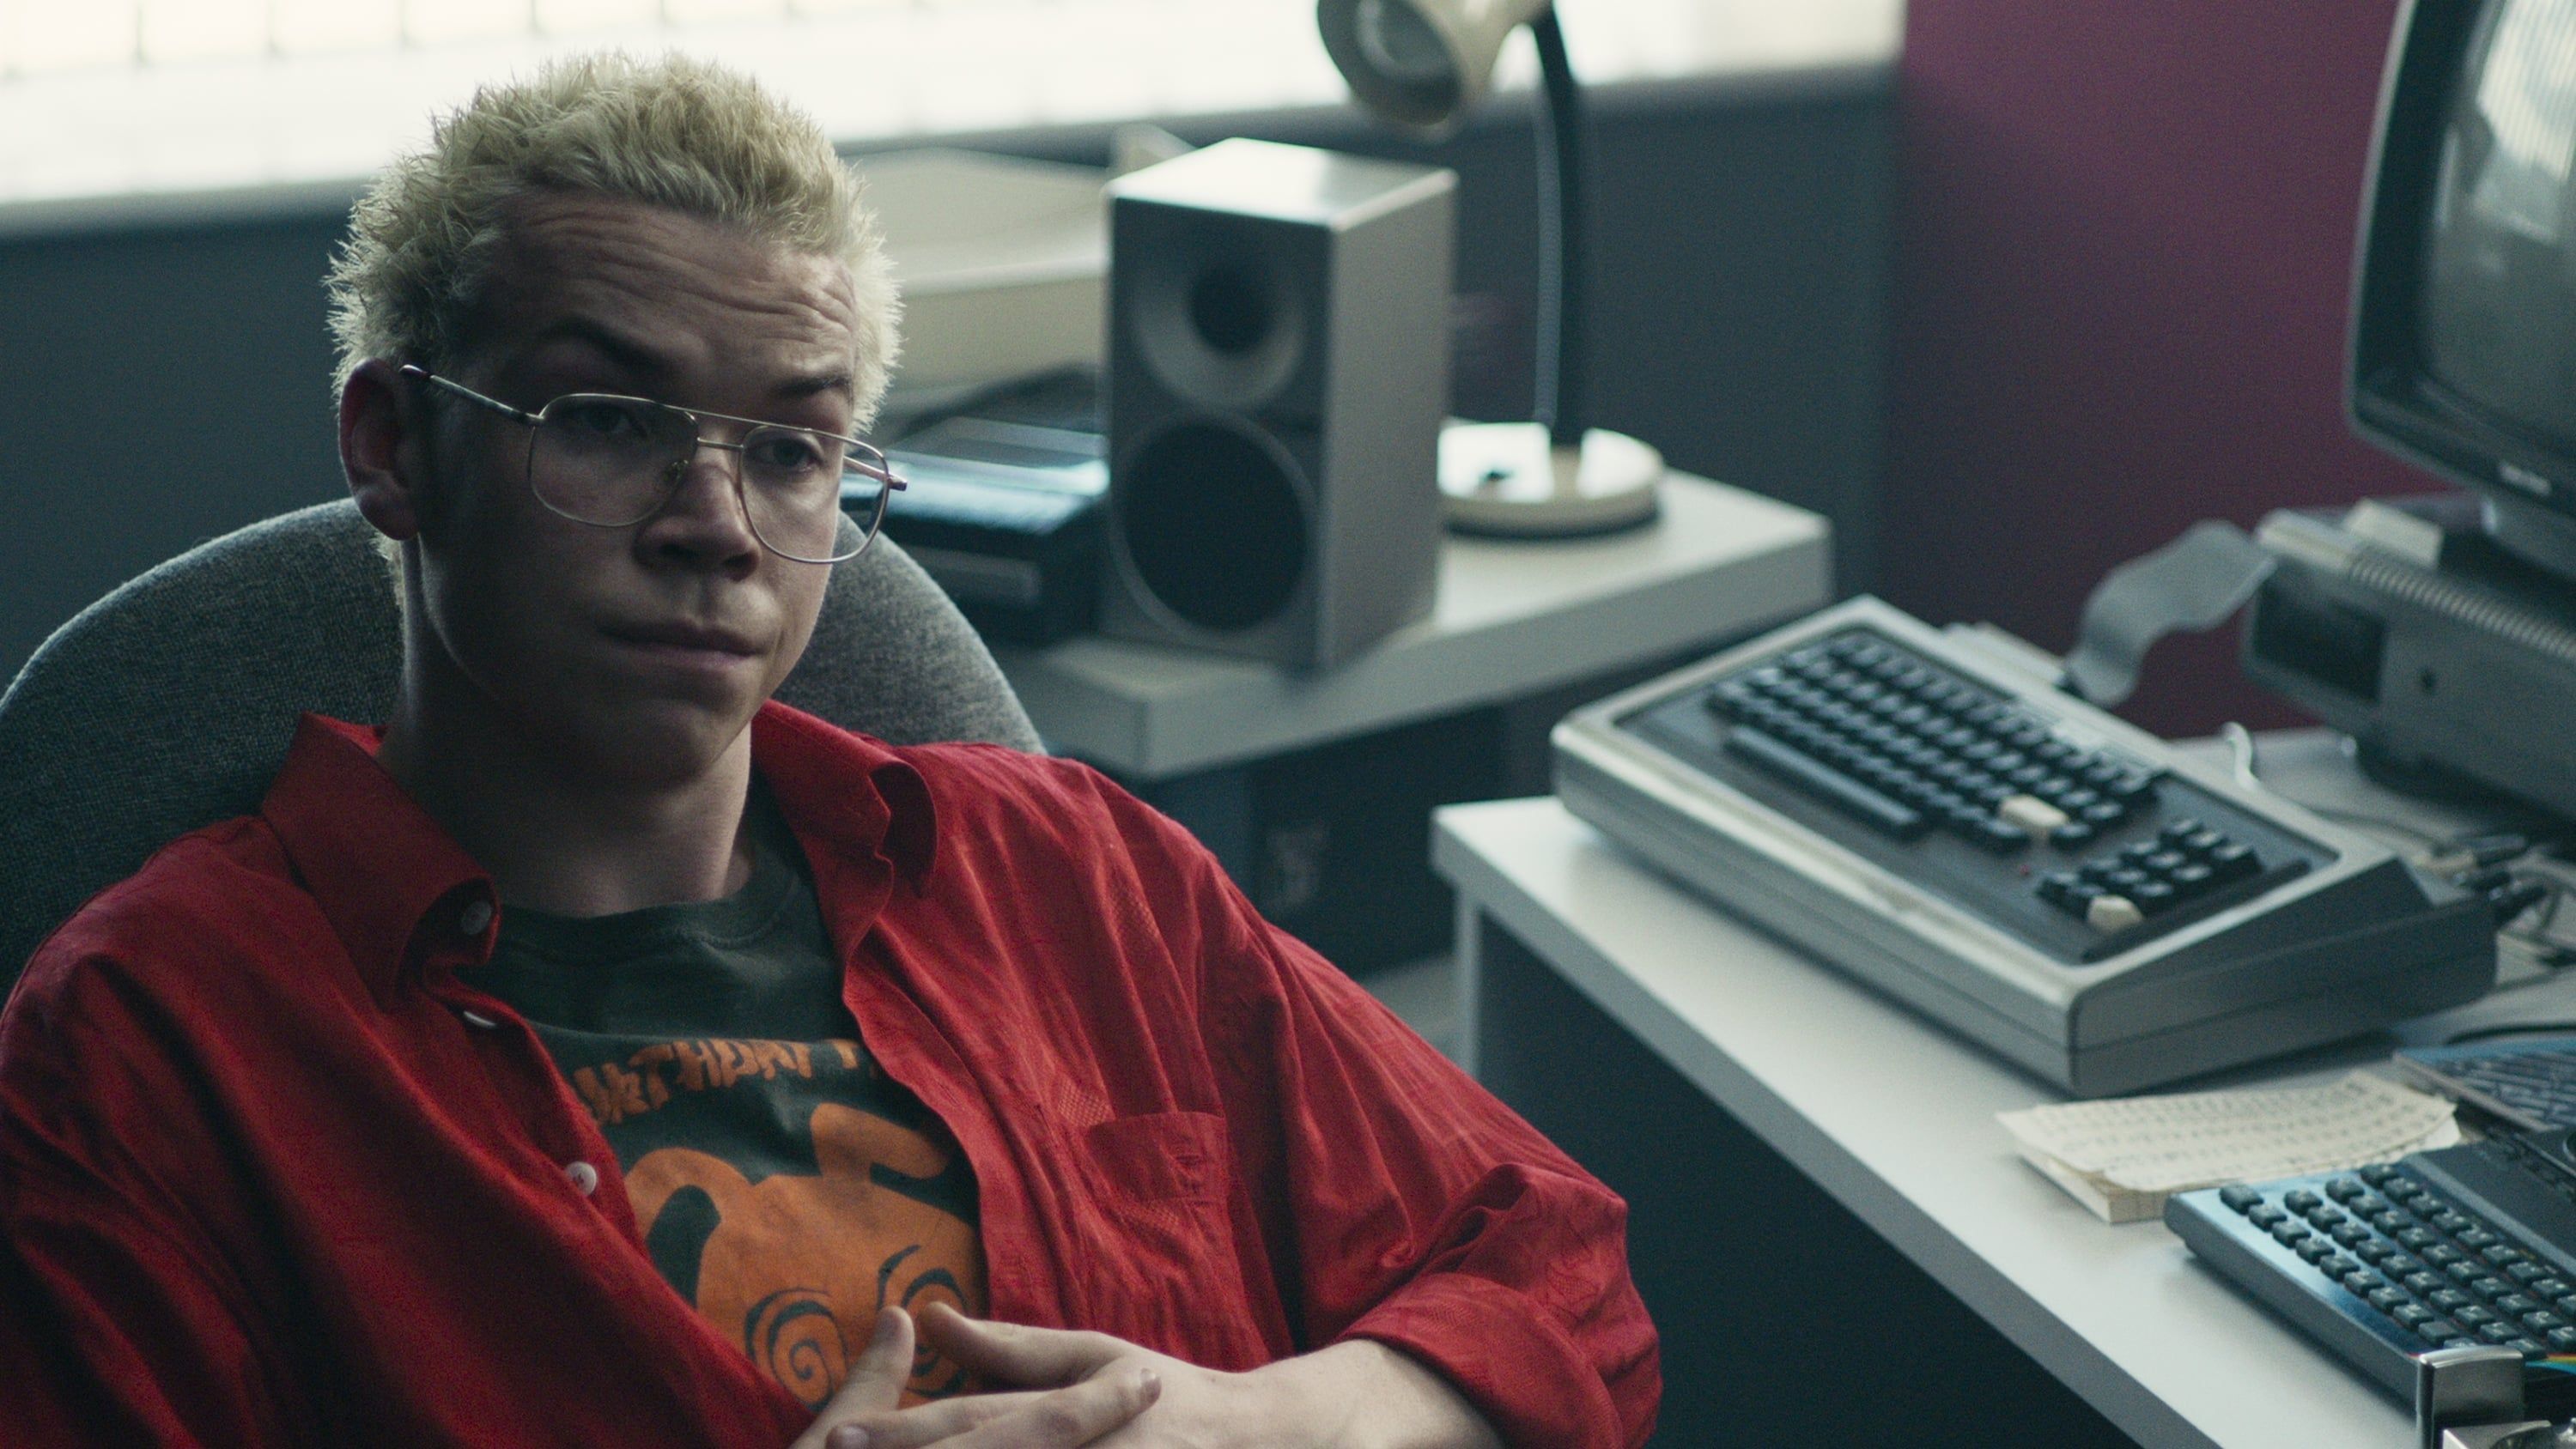 Black Mirror: Bandersnatch co-star Will Poulter lounges in a desk chair.